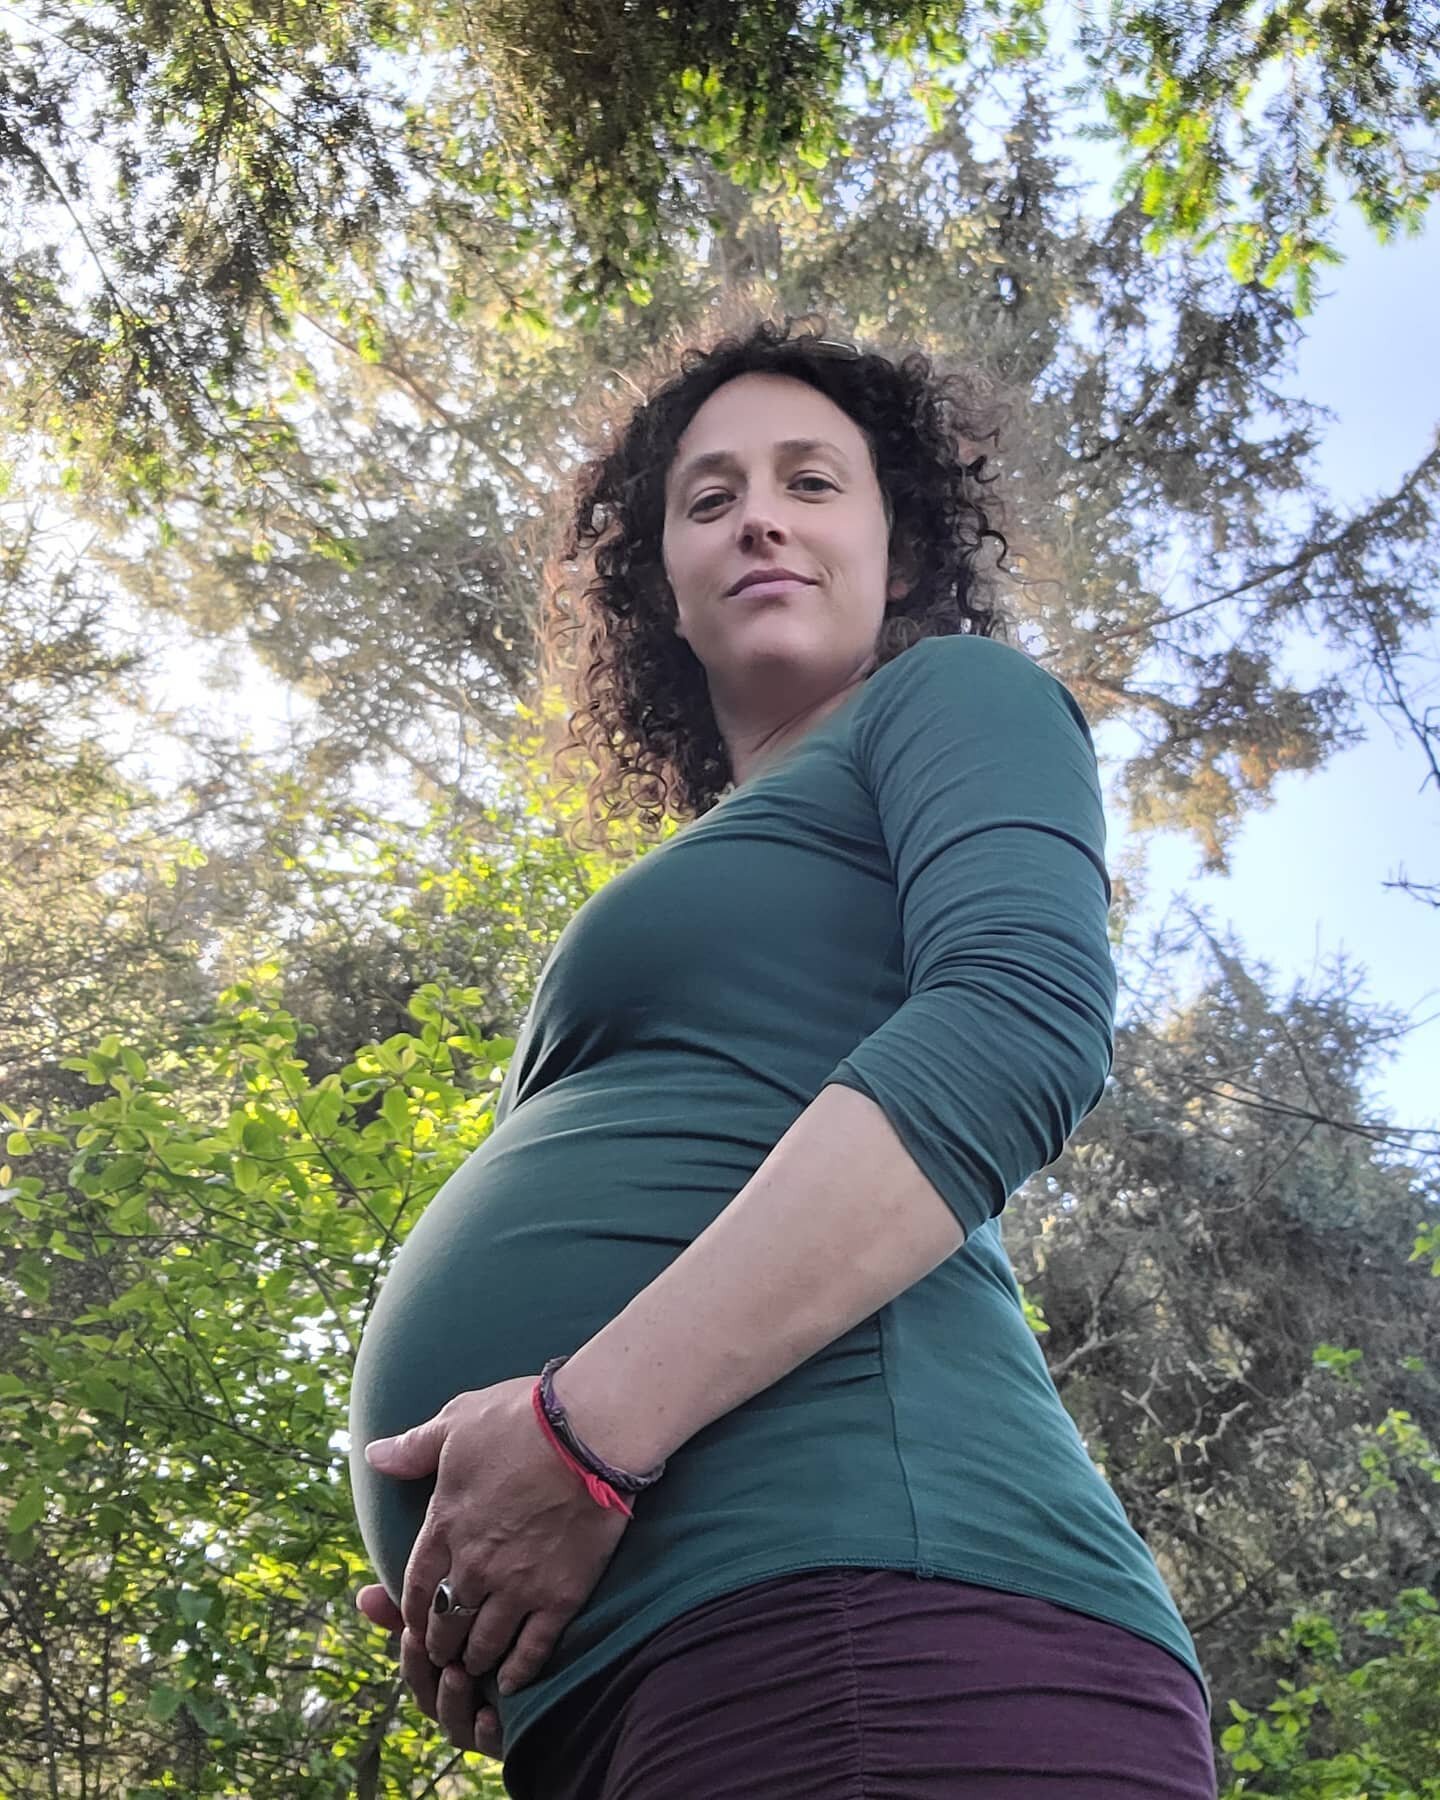 As I am coming towards the end of my pregnancy, I take a moment to breathe in nature and reflect. These last few months with babe in womb will be the last of my maiden time before I transition to mother. 

So as I go inward to reflect I also notice a